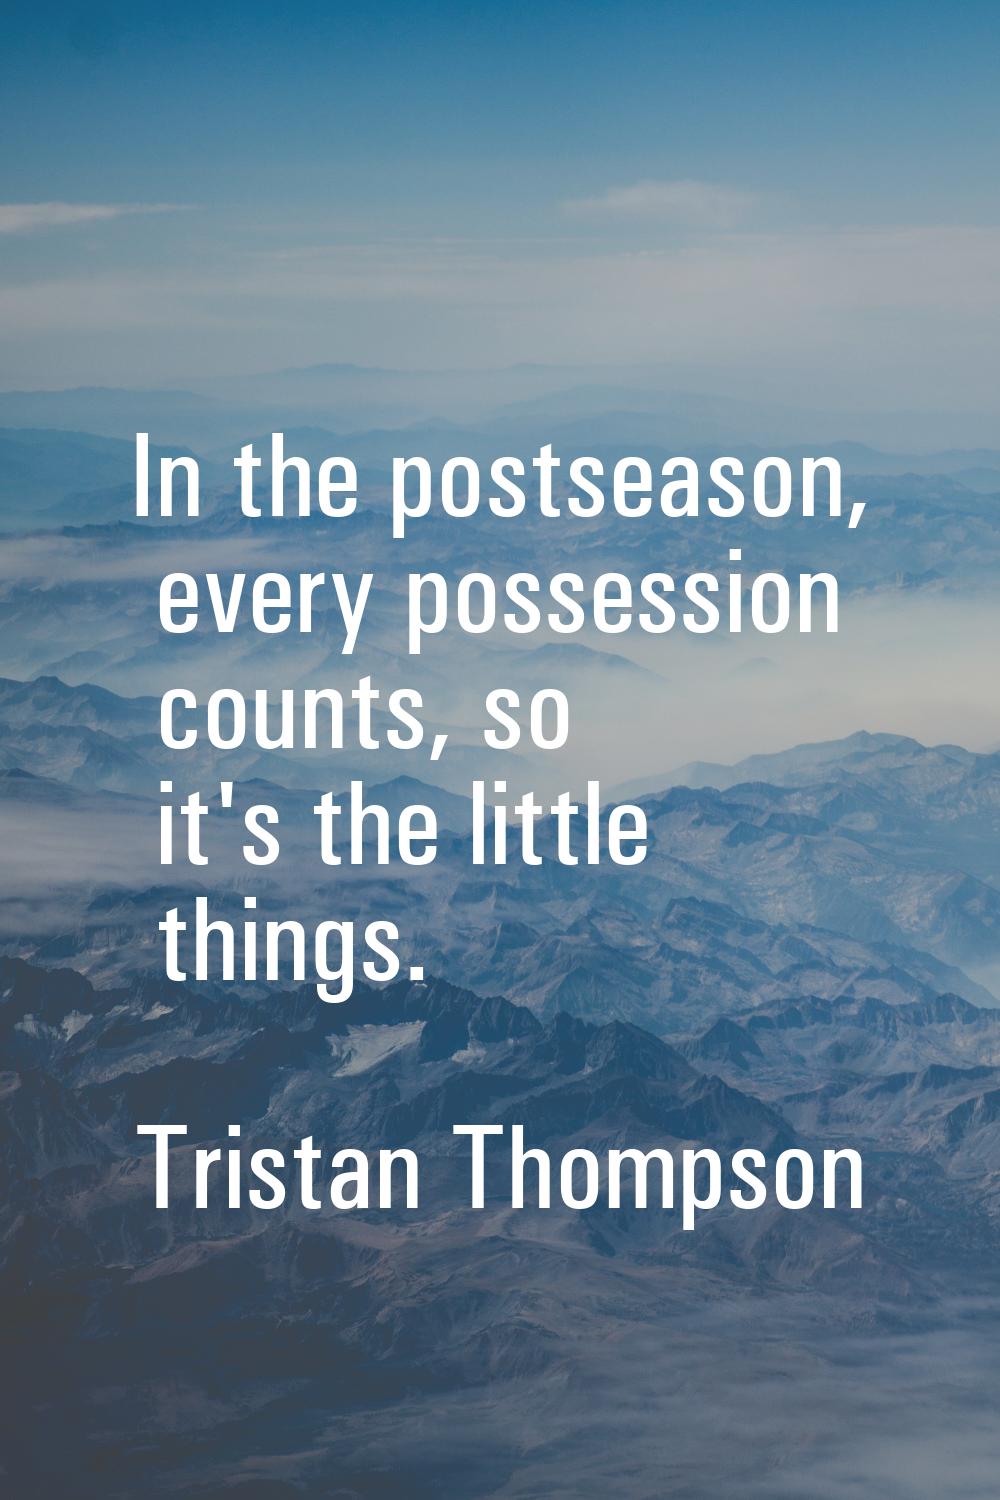 In the postseason, every possession counts, so it's the little things.